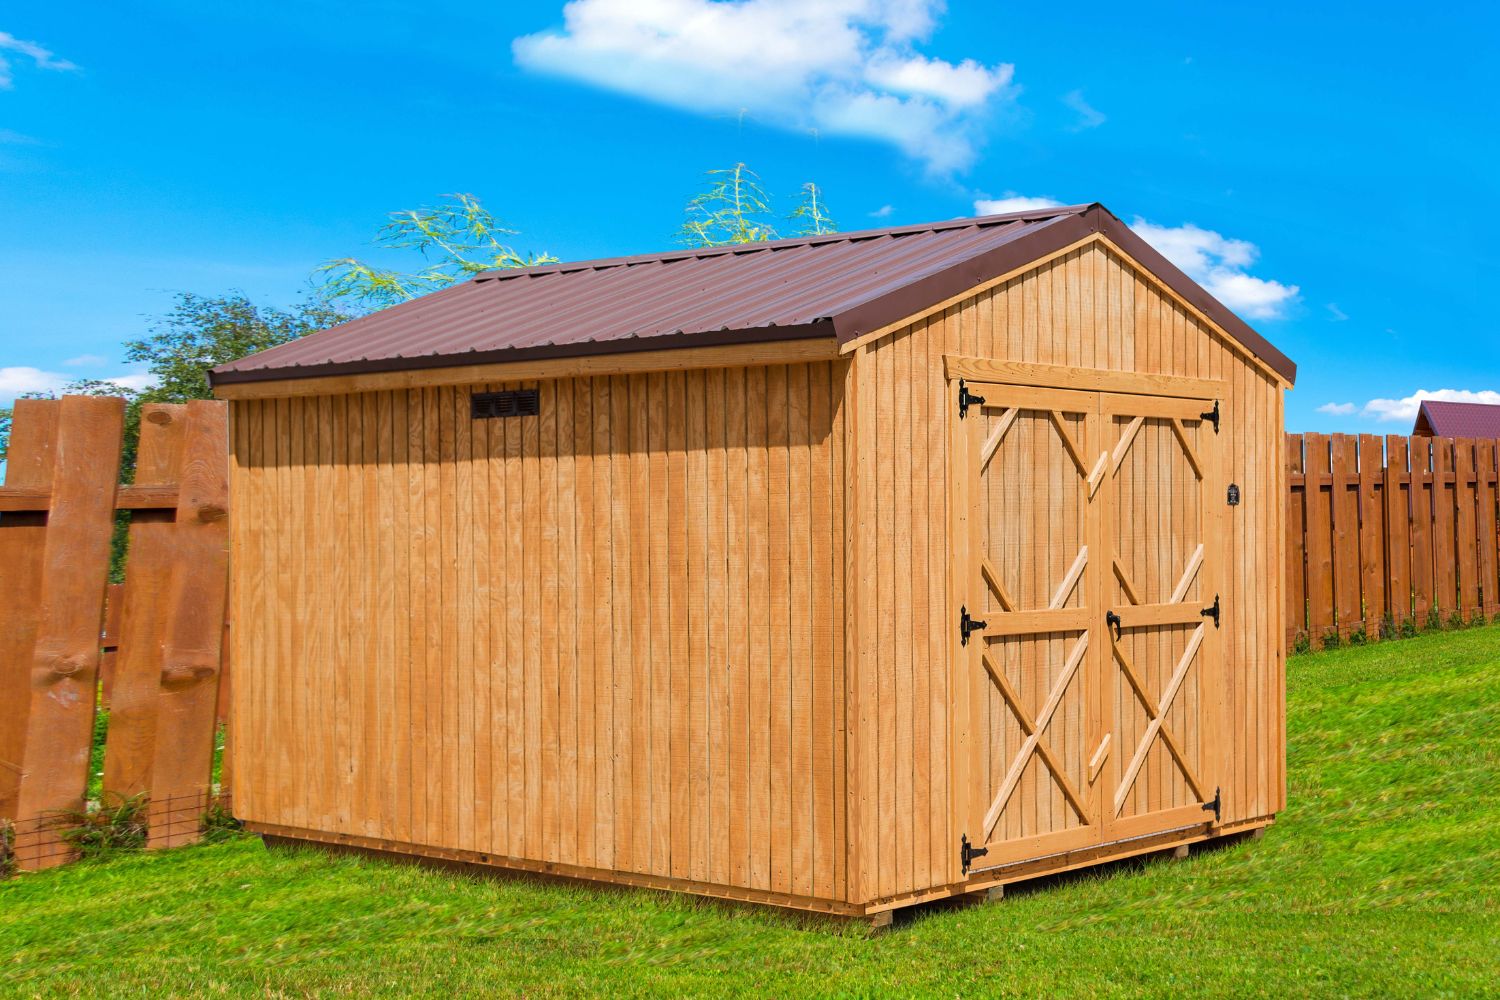 Roof Options for 10x10 Sheds